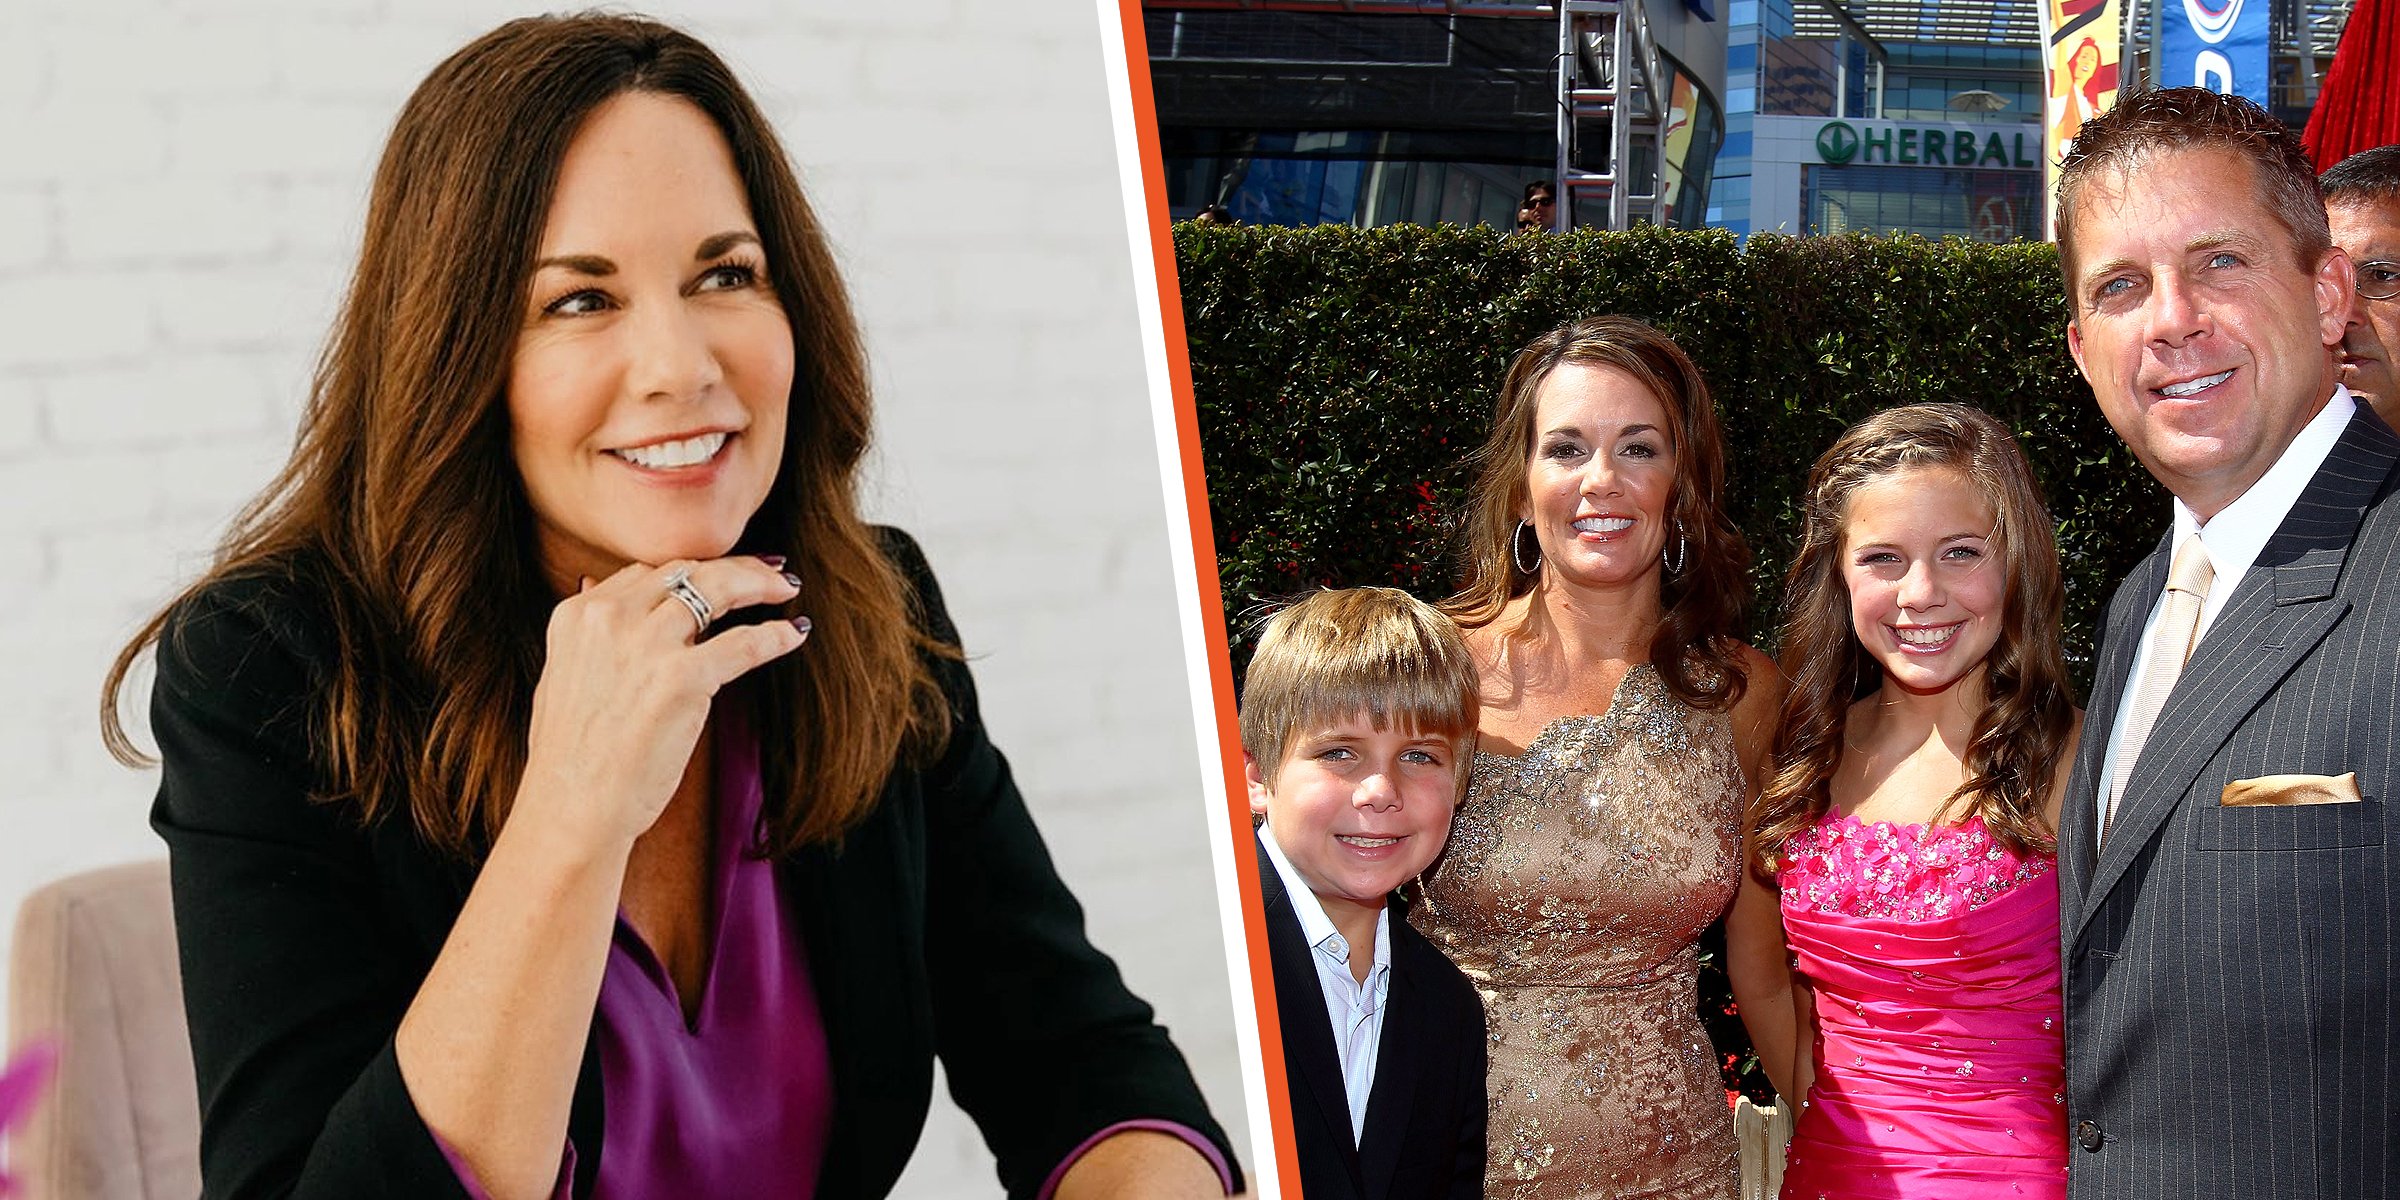 Beth Shuey — Sean Payton's Exwife's Life before and after Their Divorce